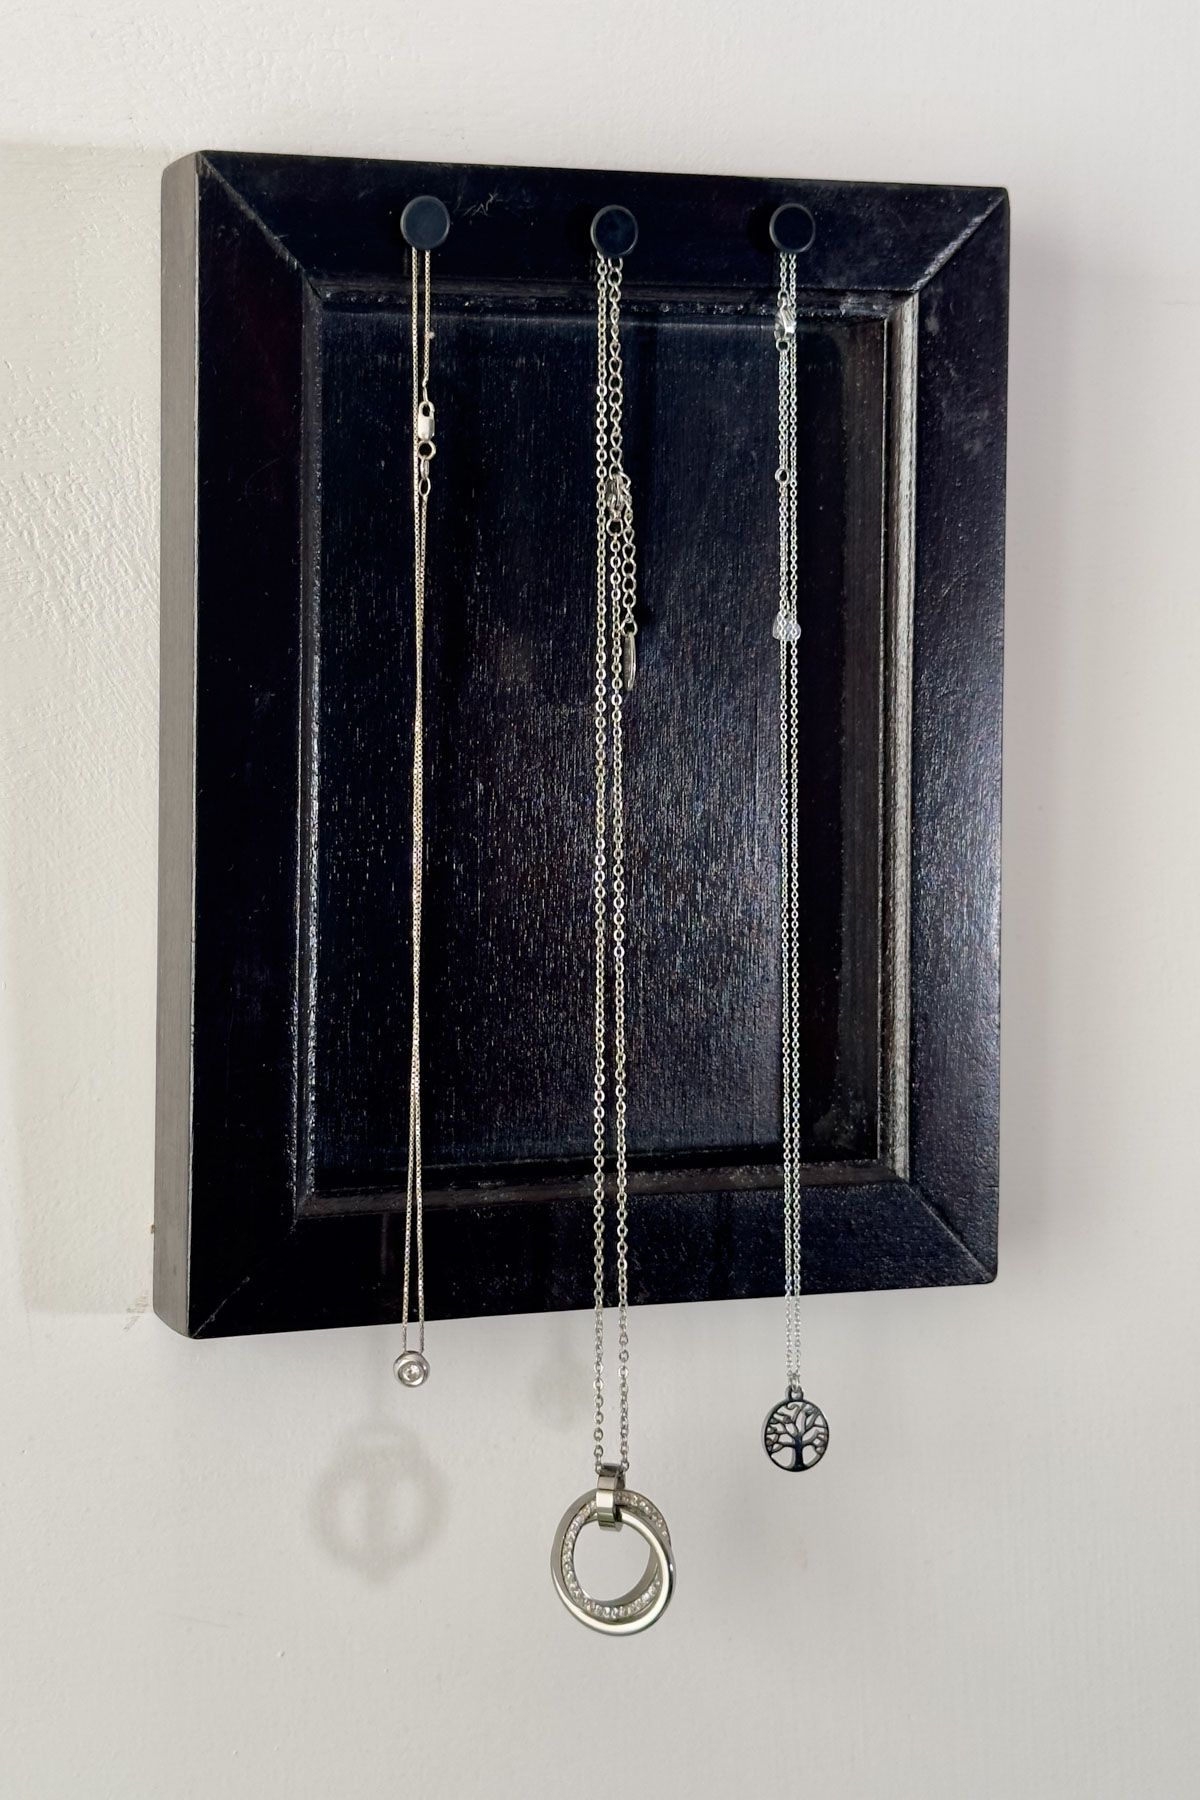 Organize Necklaces With A Frame